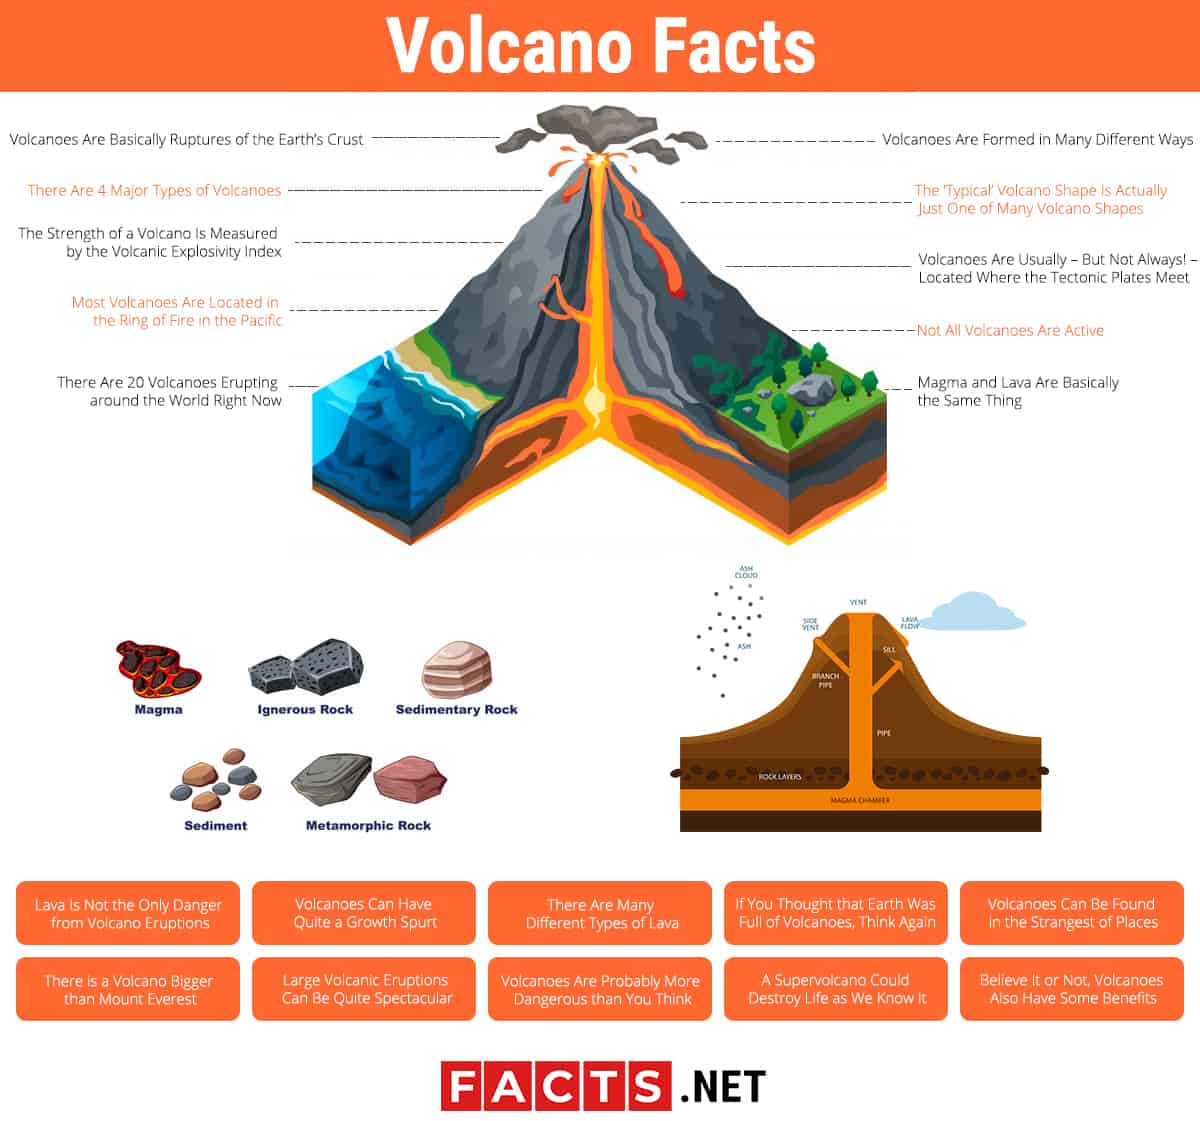 top-20-volcano-facts-formation-types-location-more-facts